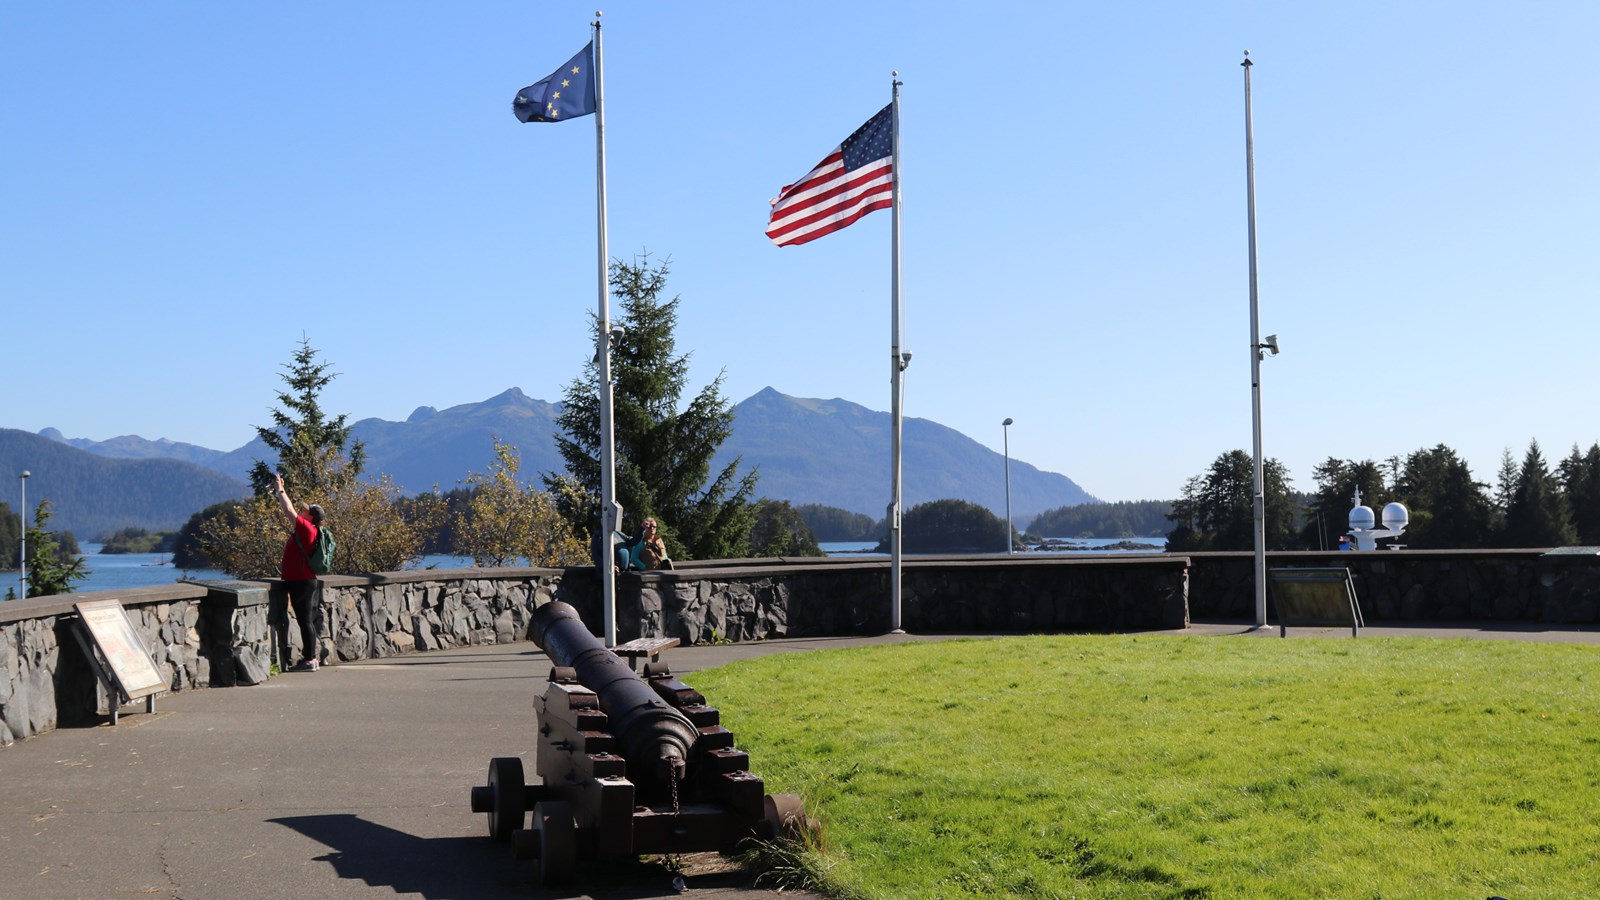 American and Alaska State Flags at full staff against a bright blue sky.